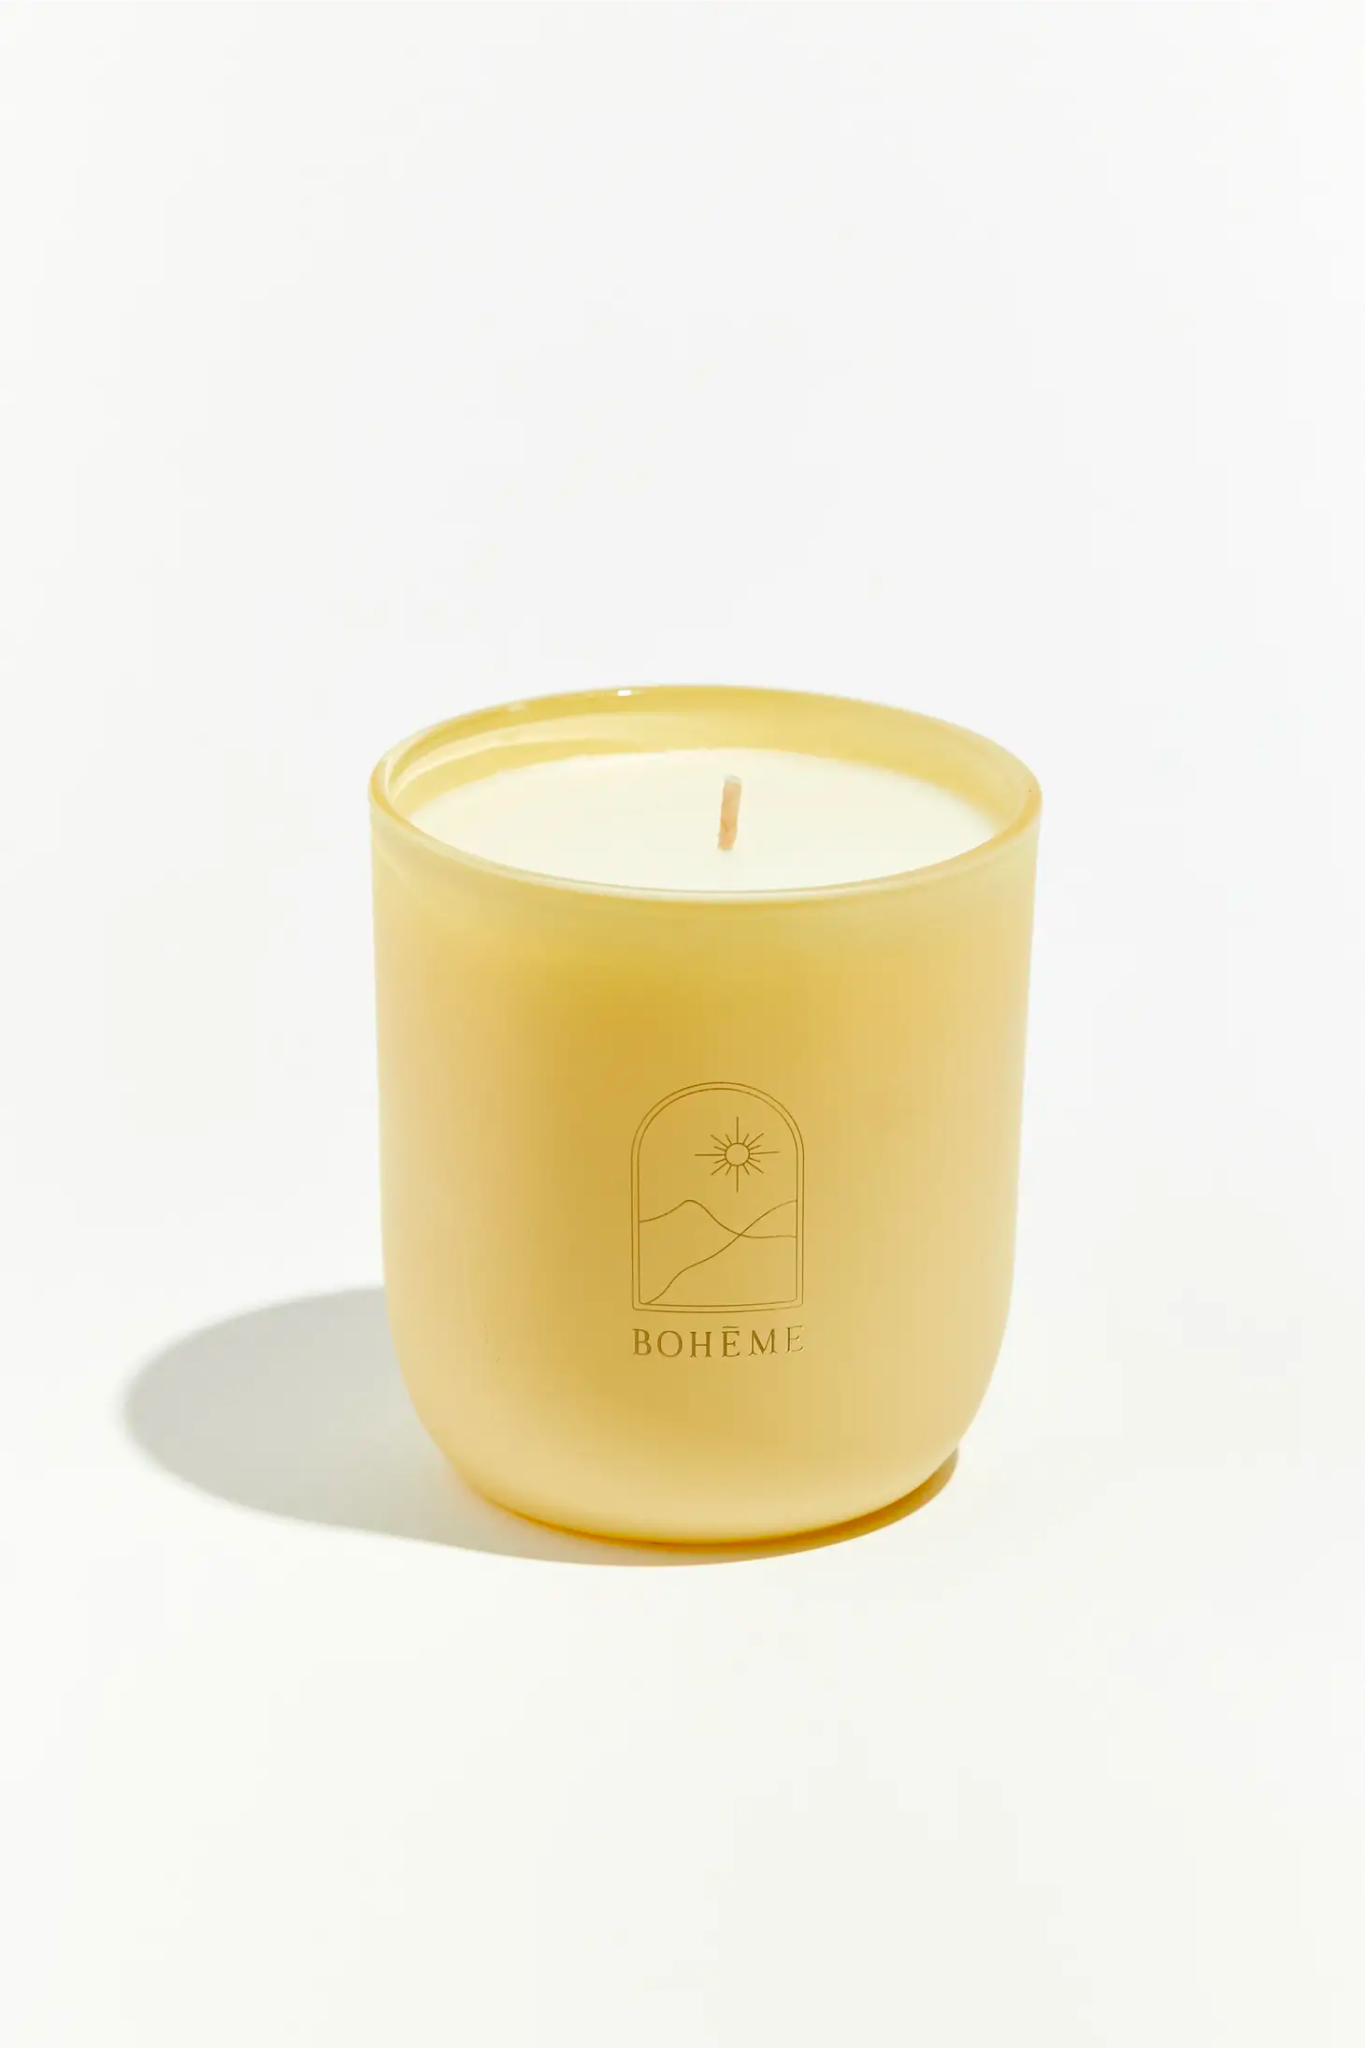 View 3 of Boheme Joshua Tree Candle, a Candles from Larrea Cove. Detail: .